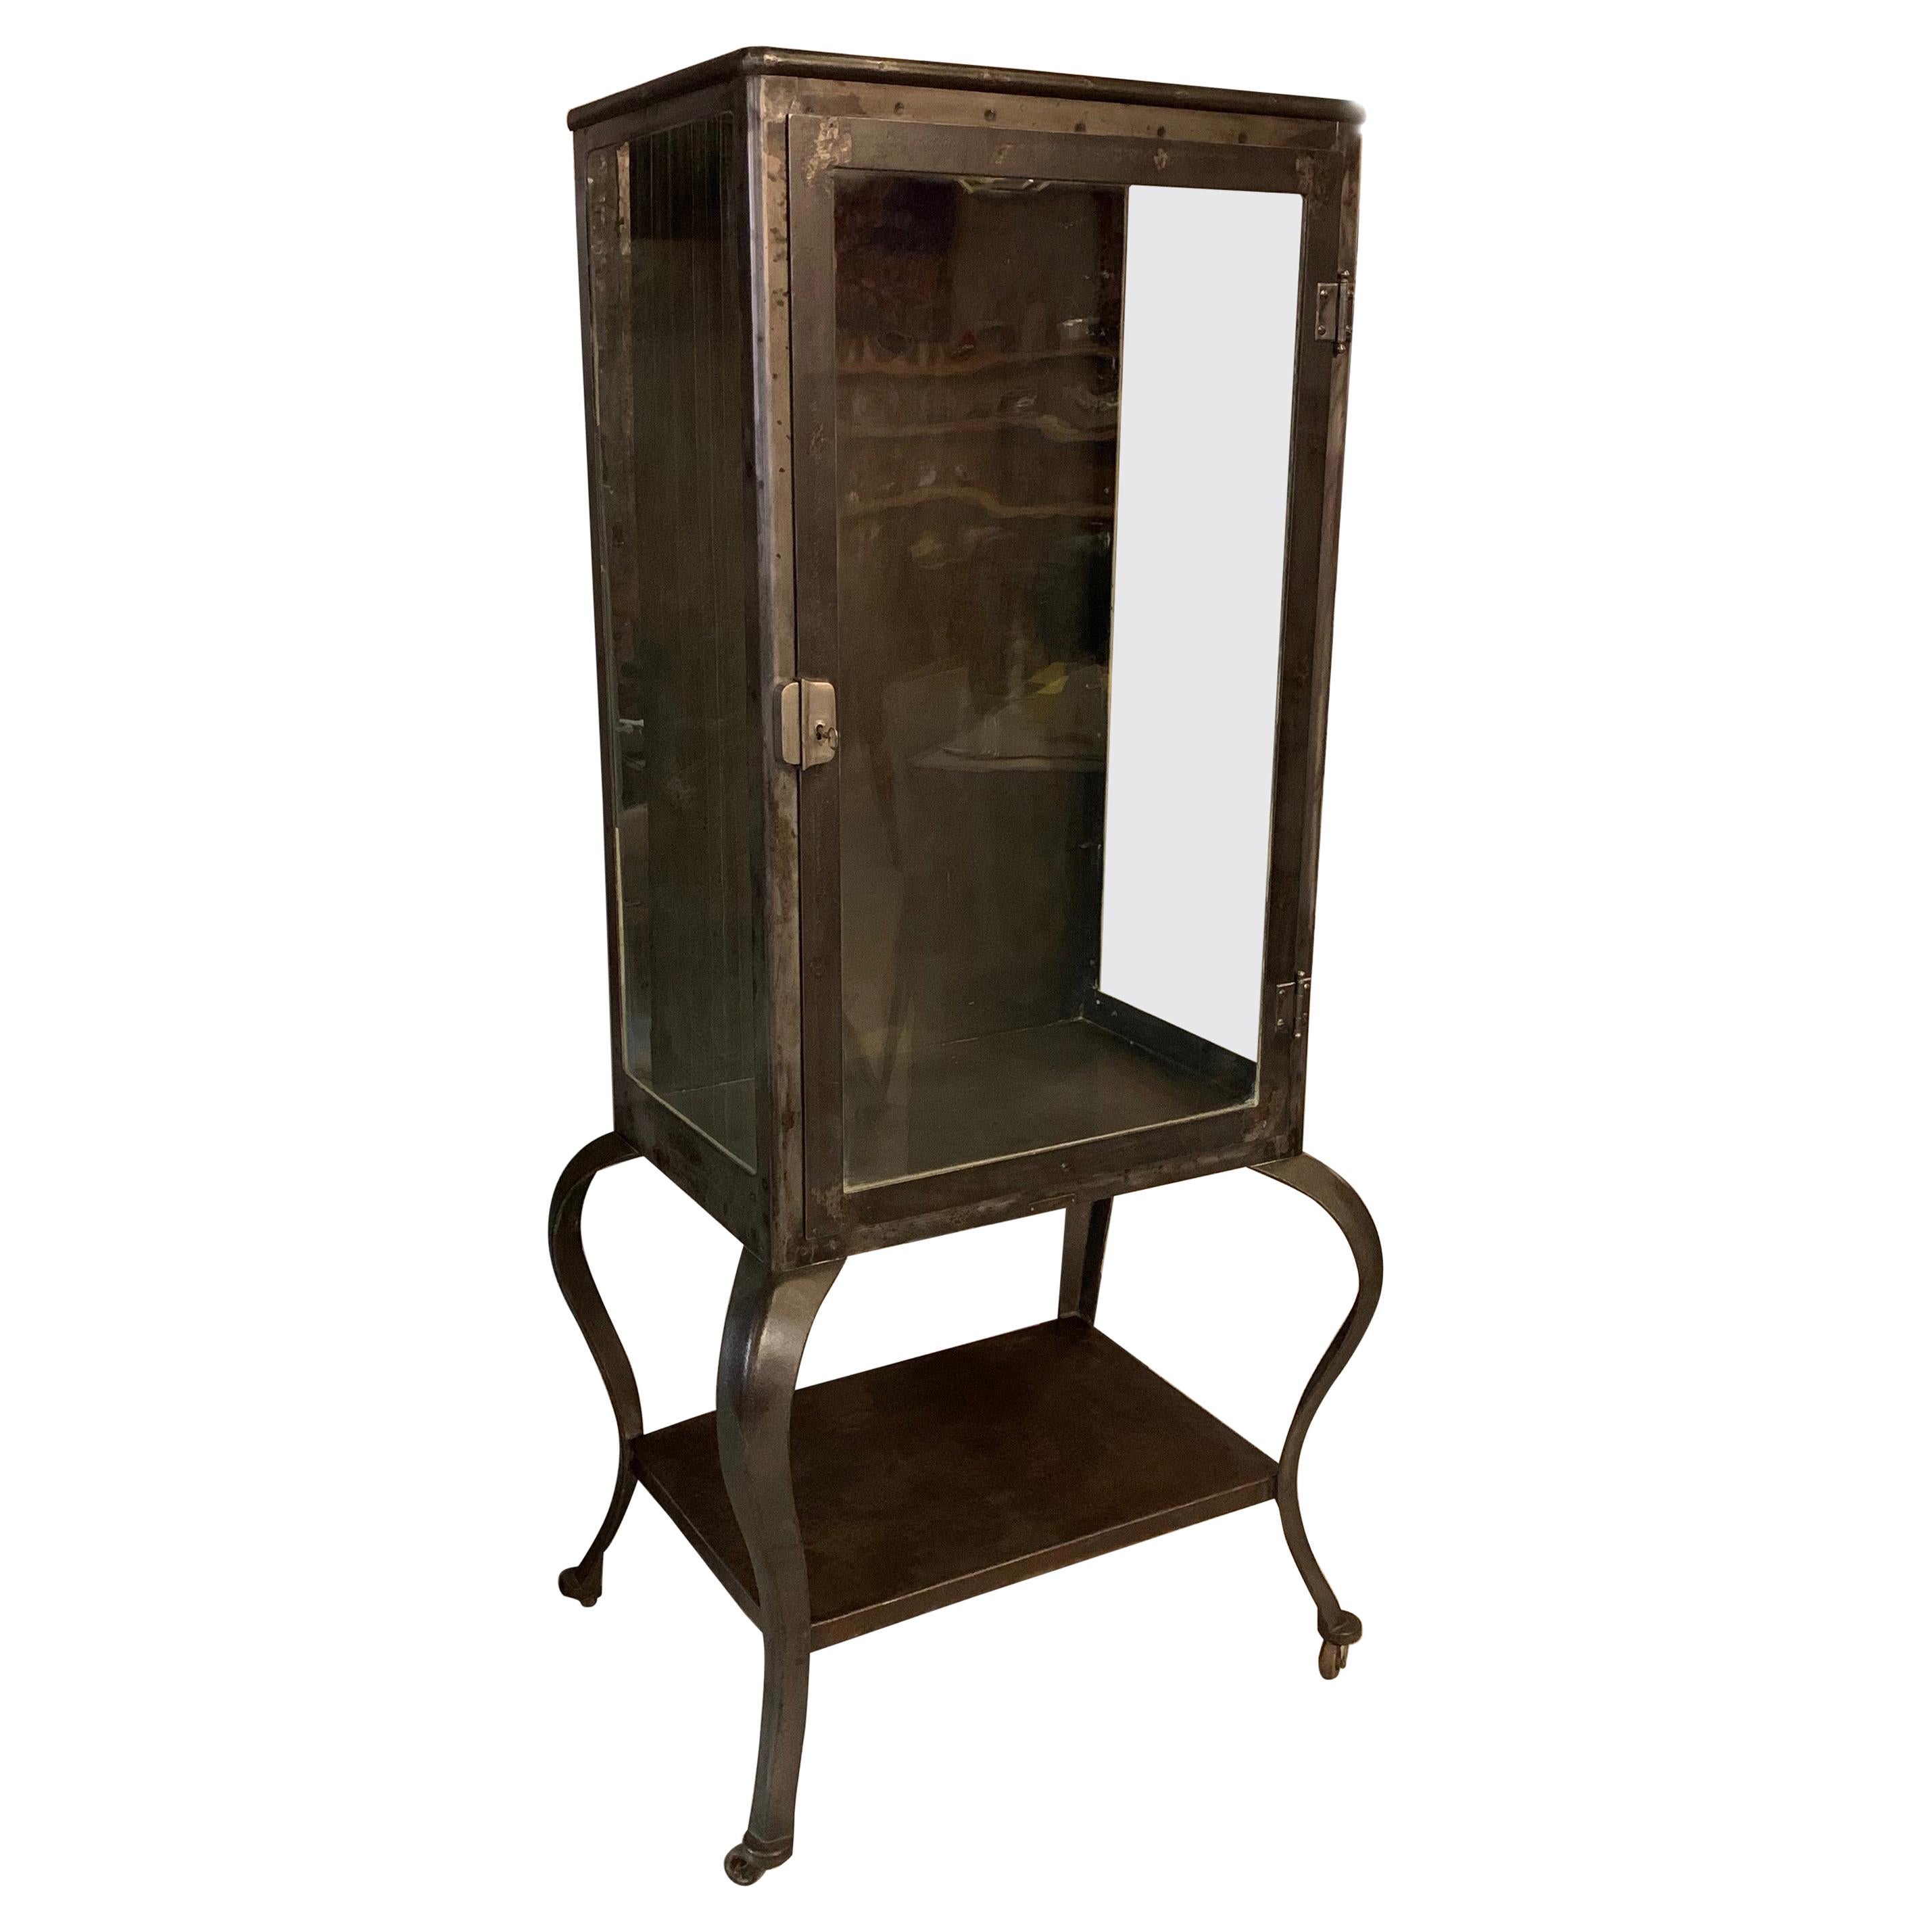 Antique Industrial Brushed Steel Apothecary Display Cabinet